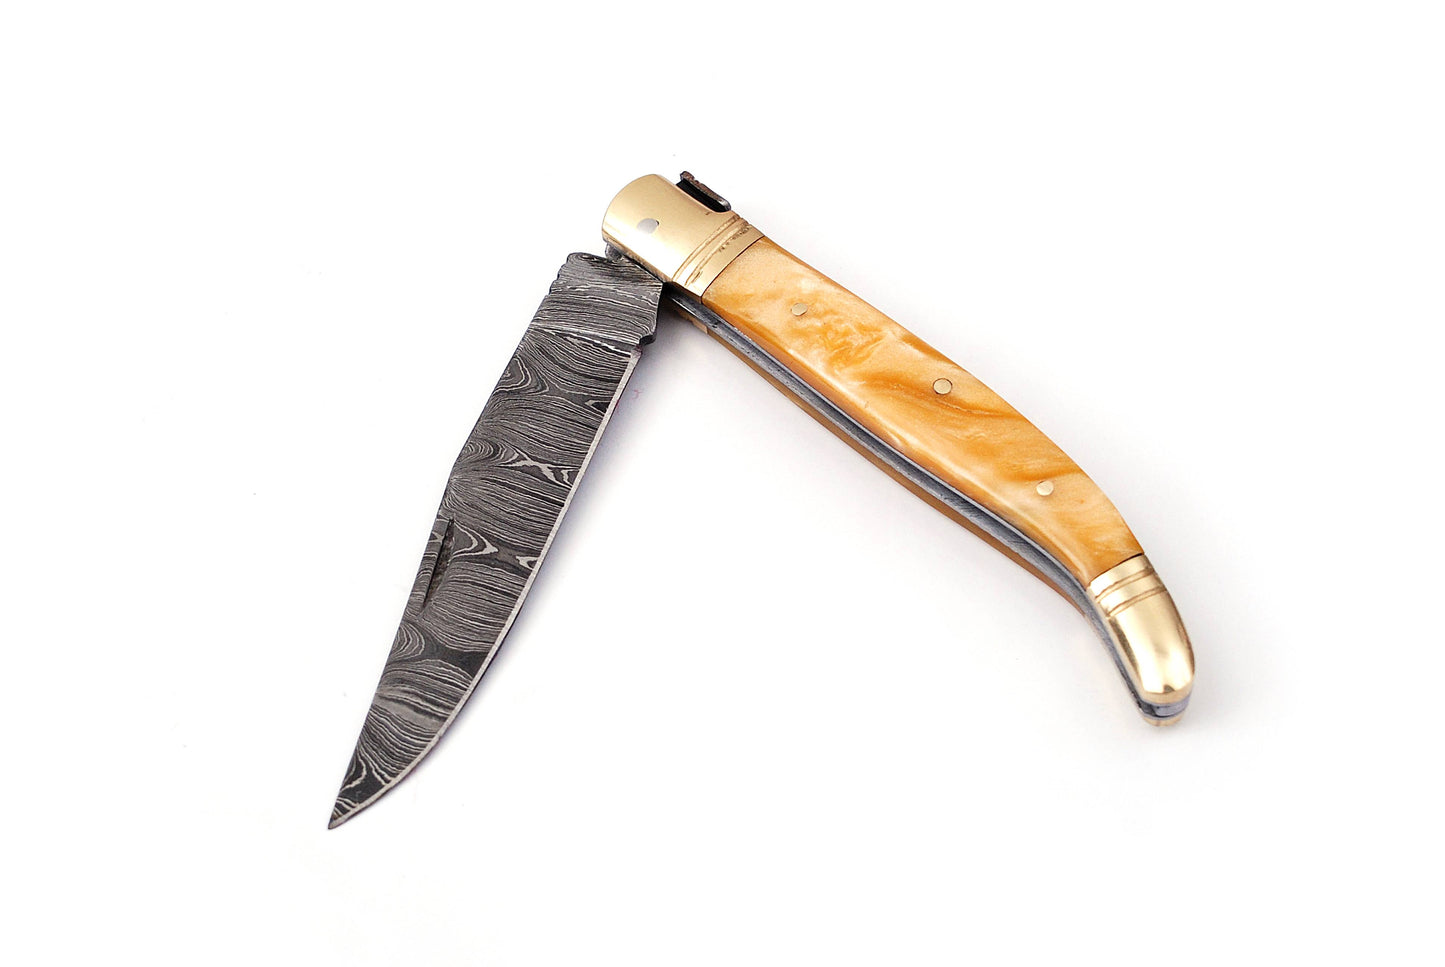 Copy of Laguiole Folding Damascus steel knife, 8.5" Long with 4" hand forged custom twist pattern Blade. Beige color unshrinkable Raisen scale with brass bolster, Cow hide leather sheath included